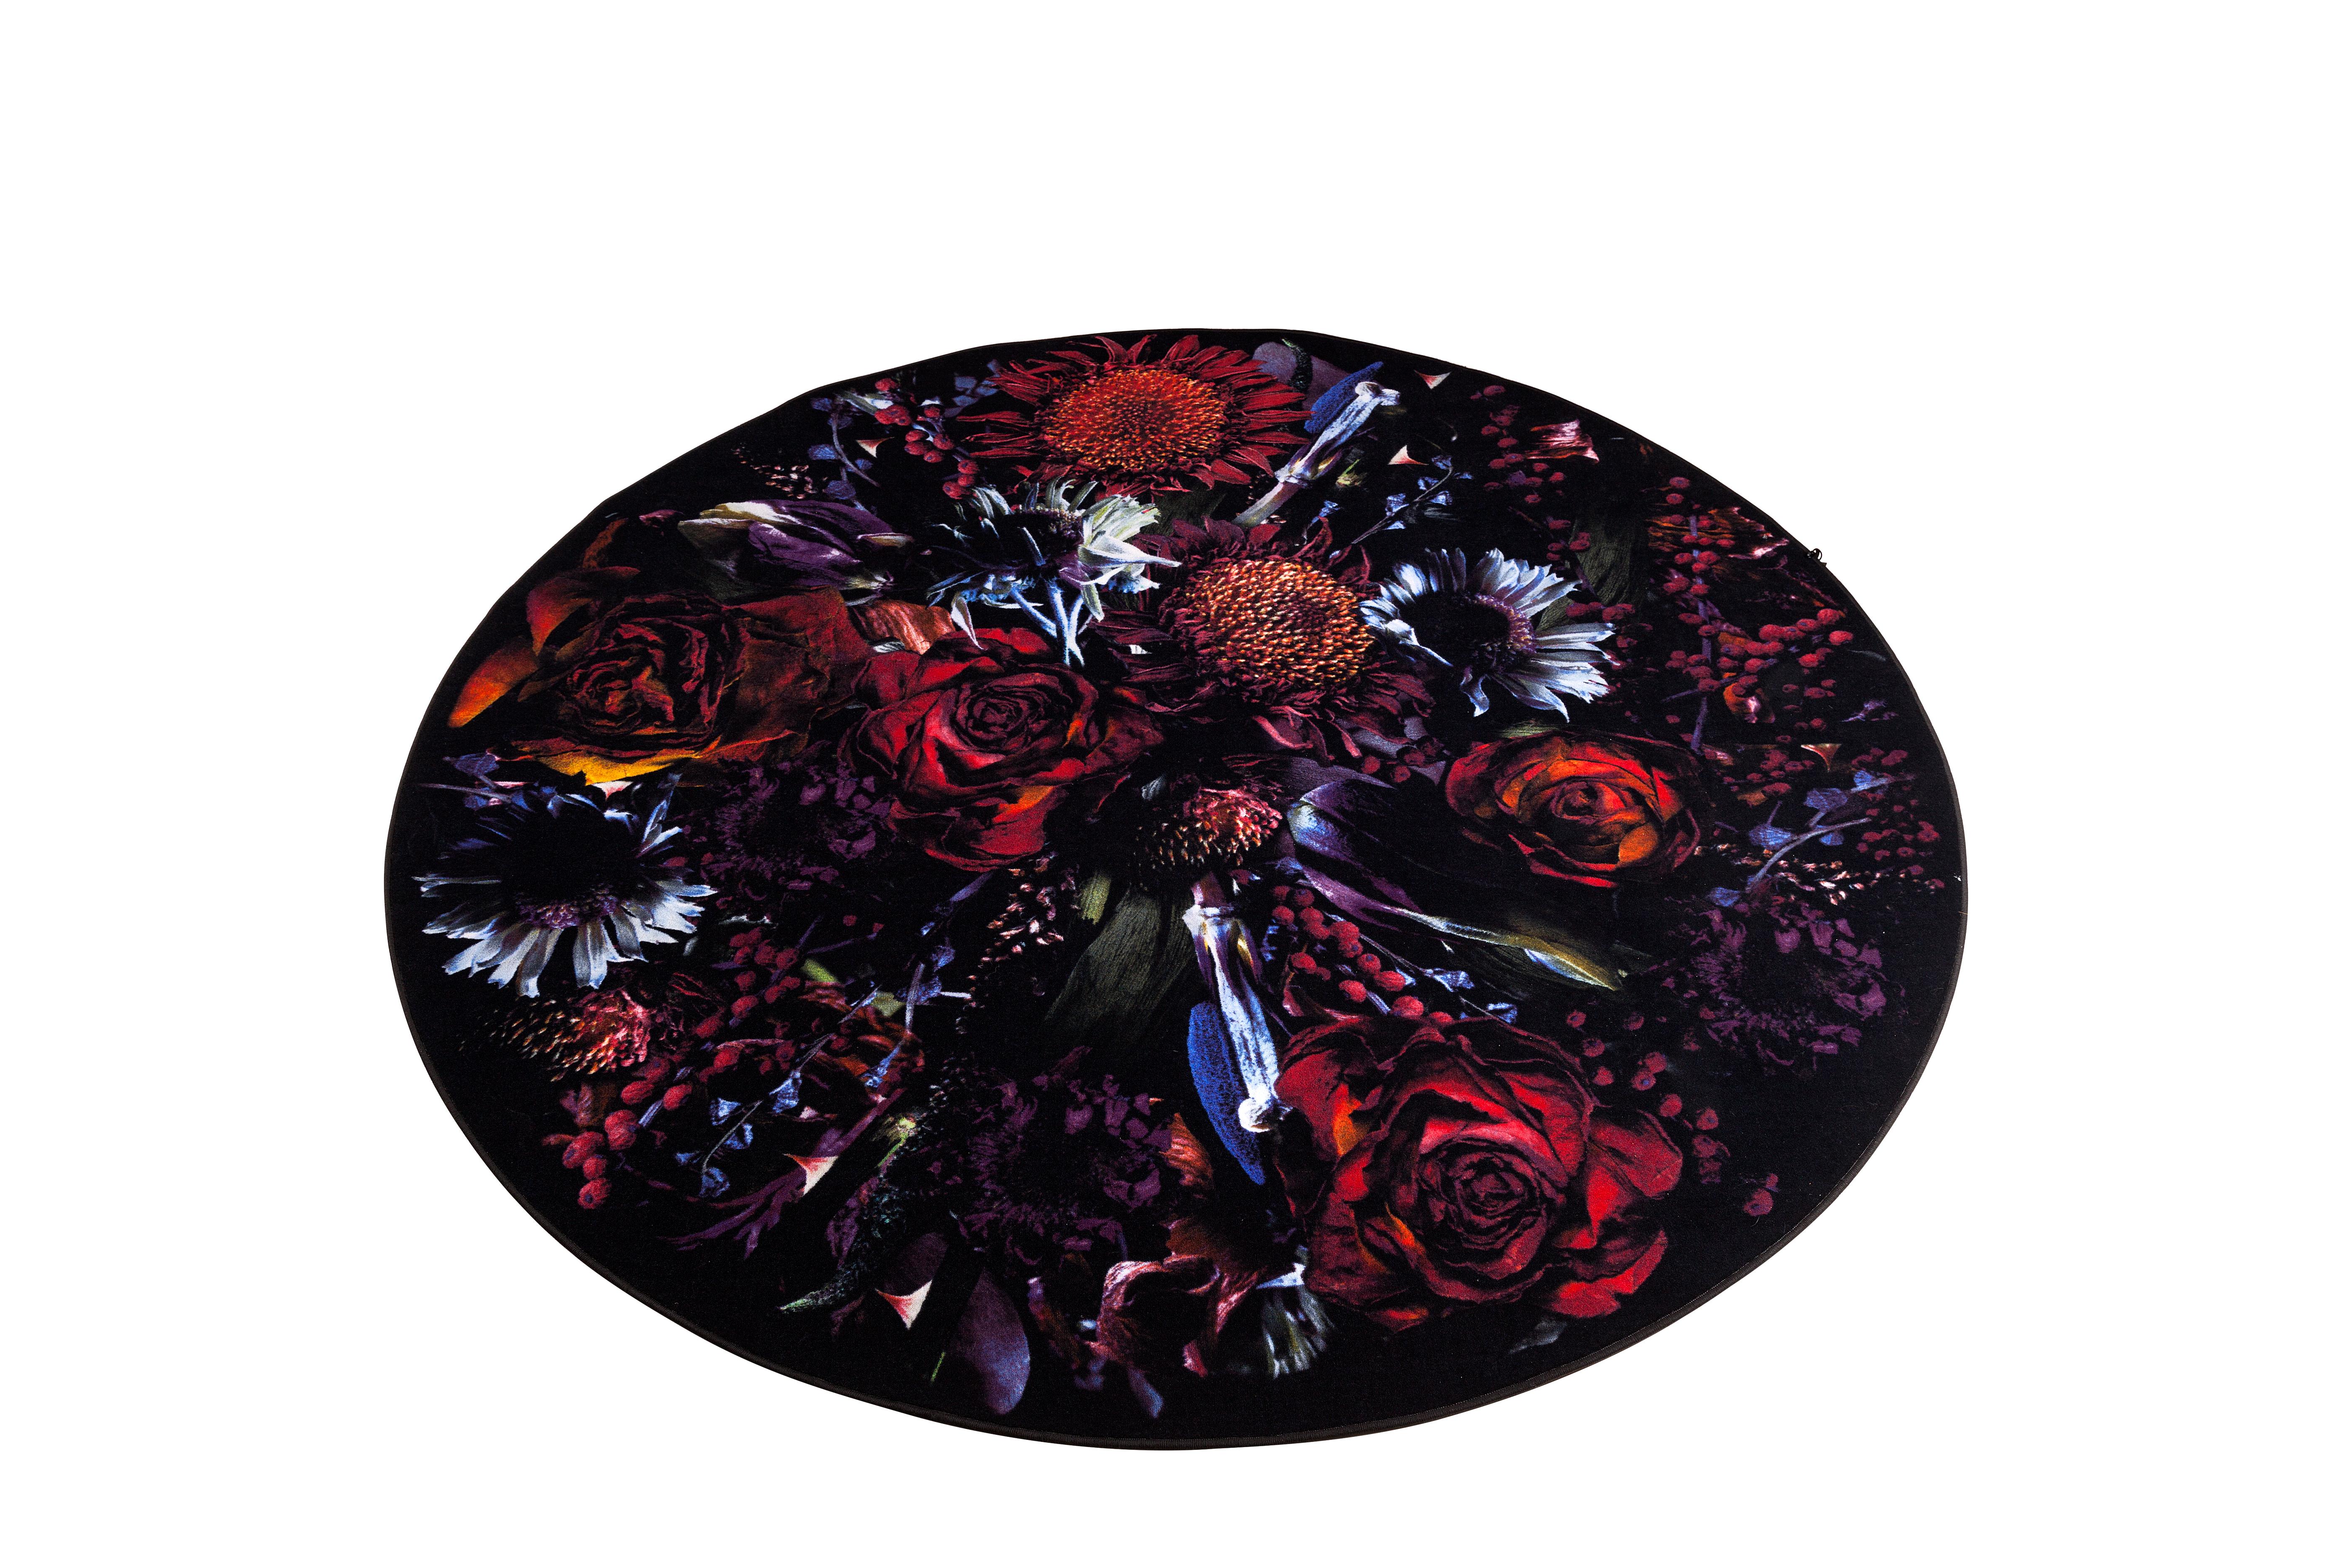 Moooi Small Fool’s Paradise Round rug in Wool by Marcel Wanders Studio

Marcel Wanders studio is a leading product and interior design studio located in the creative capital of Amsterdam. The studio has over 1,900 + iconic product and interior